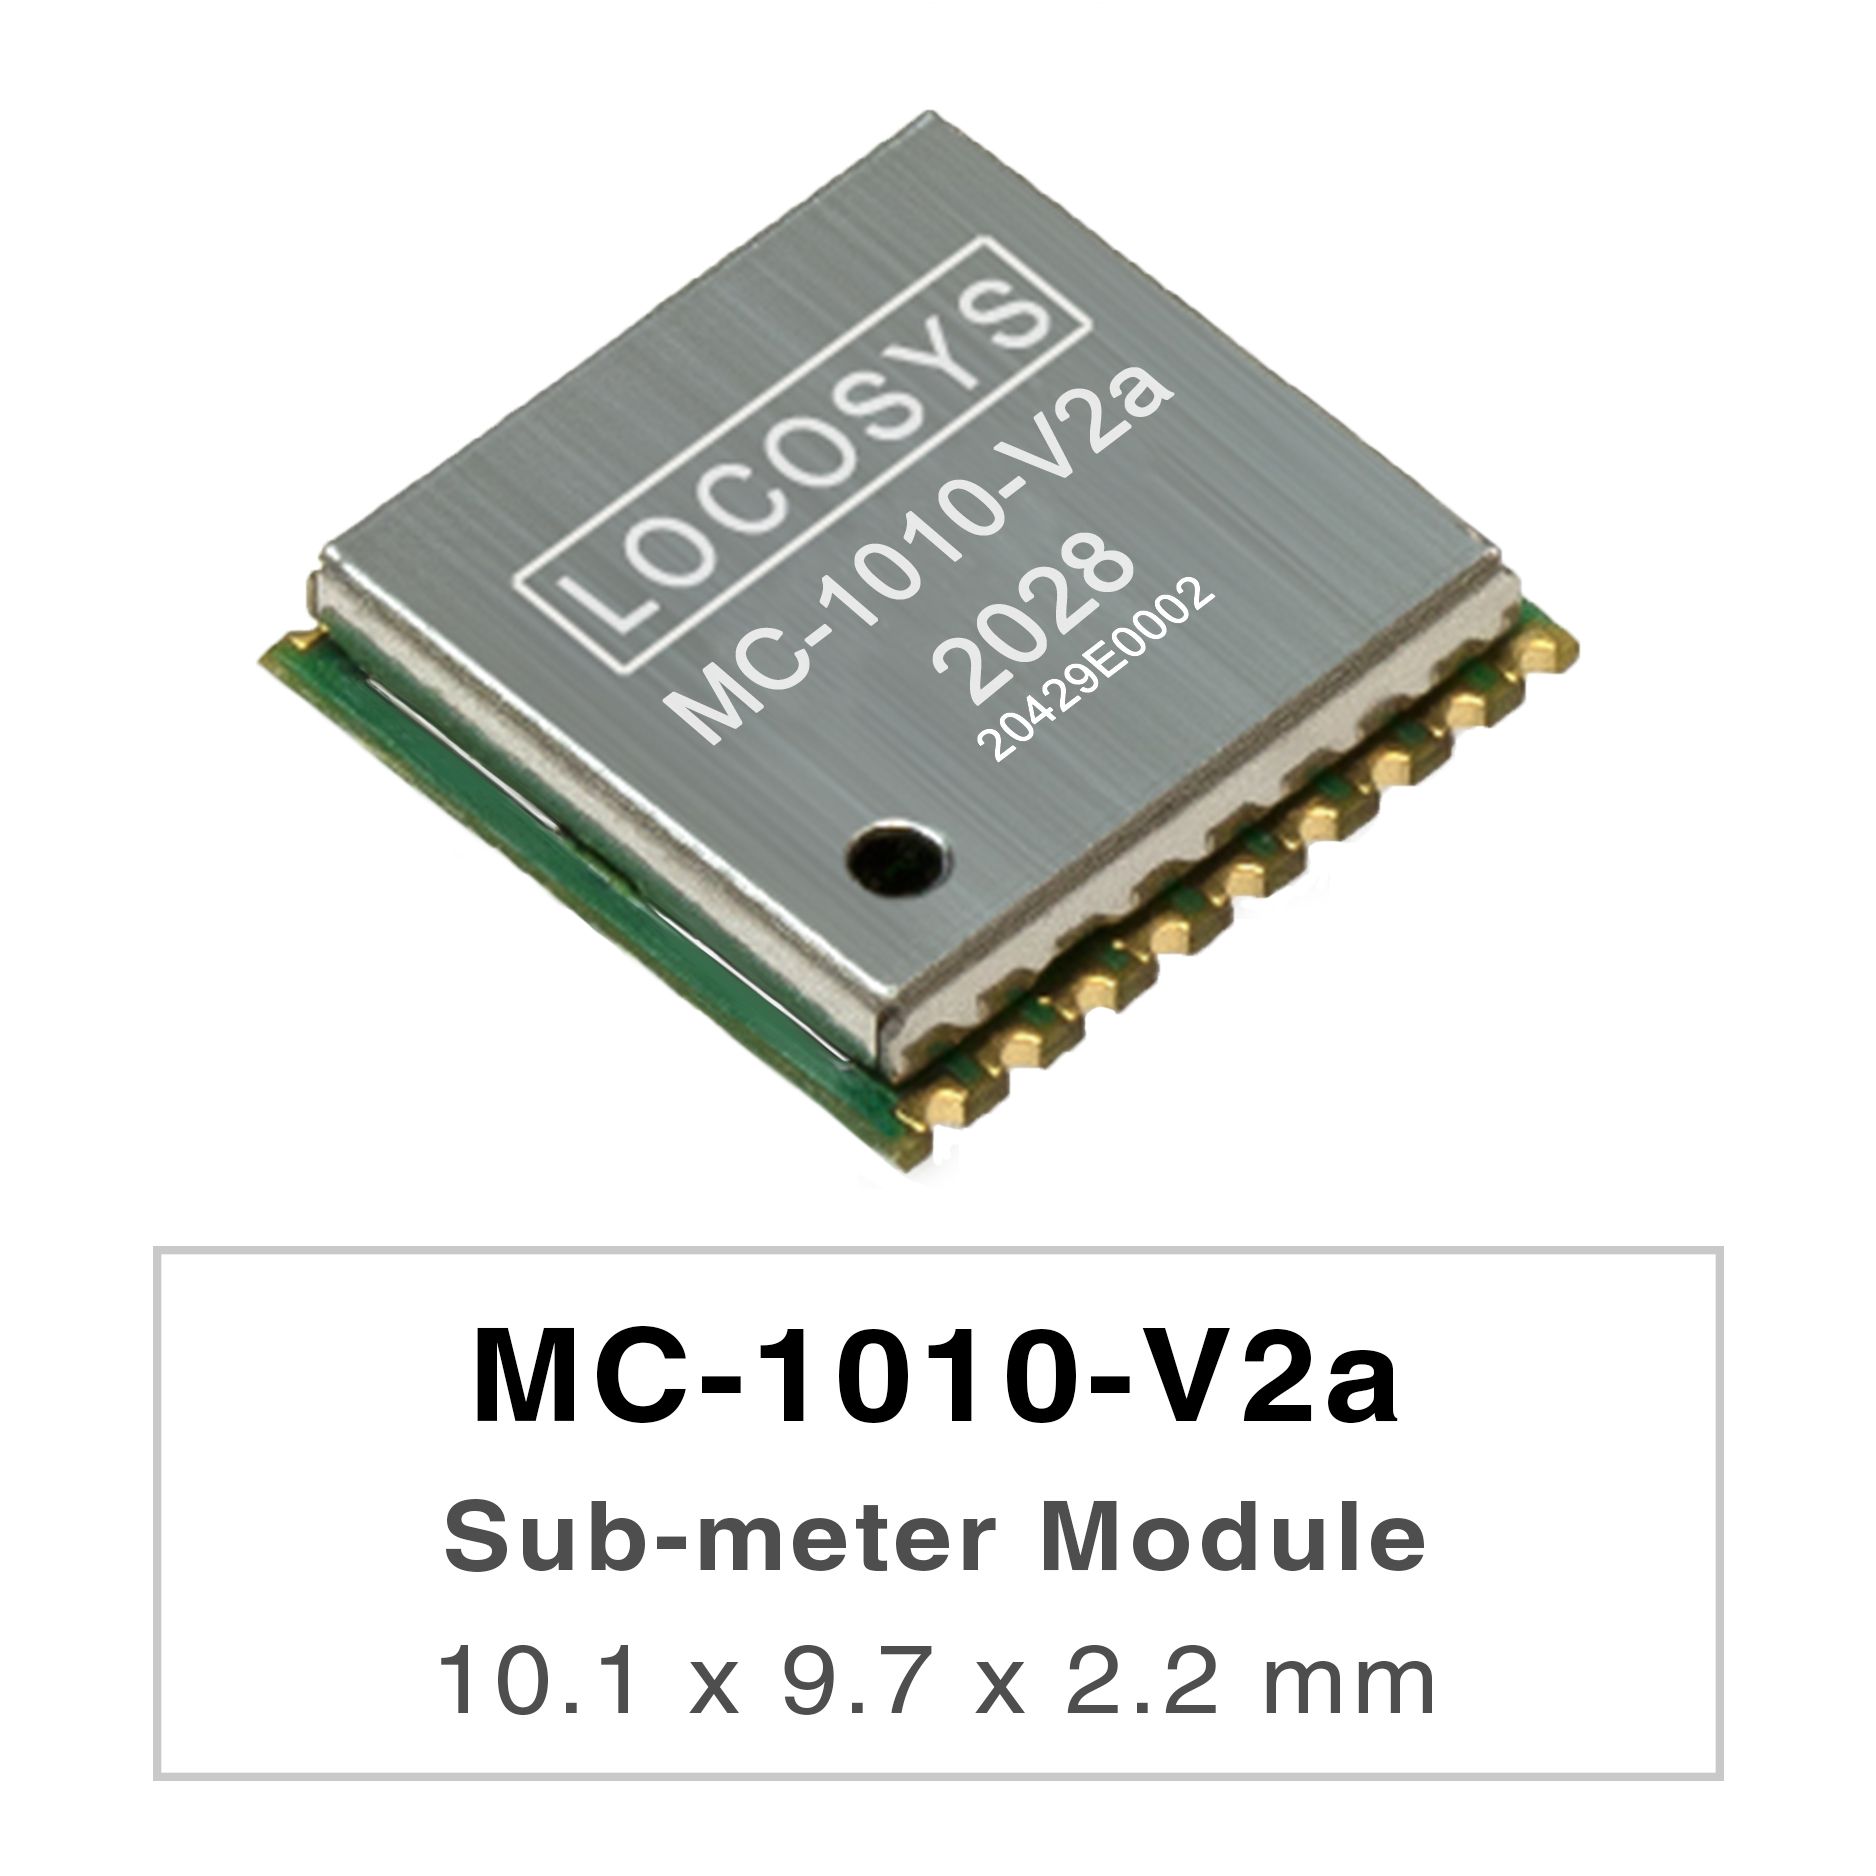 LOCOSYS MC-1010-Vxx series are high-performance dual-band GNSS positioning modules that are
<br />capable of tracking all global civil navigation systems. They adopt 12 nm process and integrate efficient
<br />power management architecture to perform low power and high sensitivity.